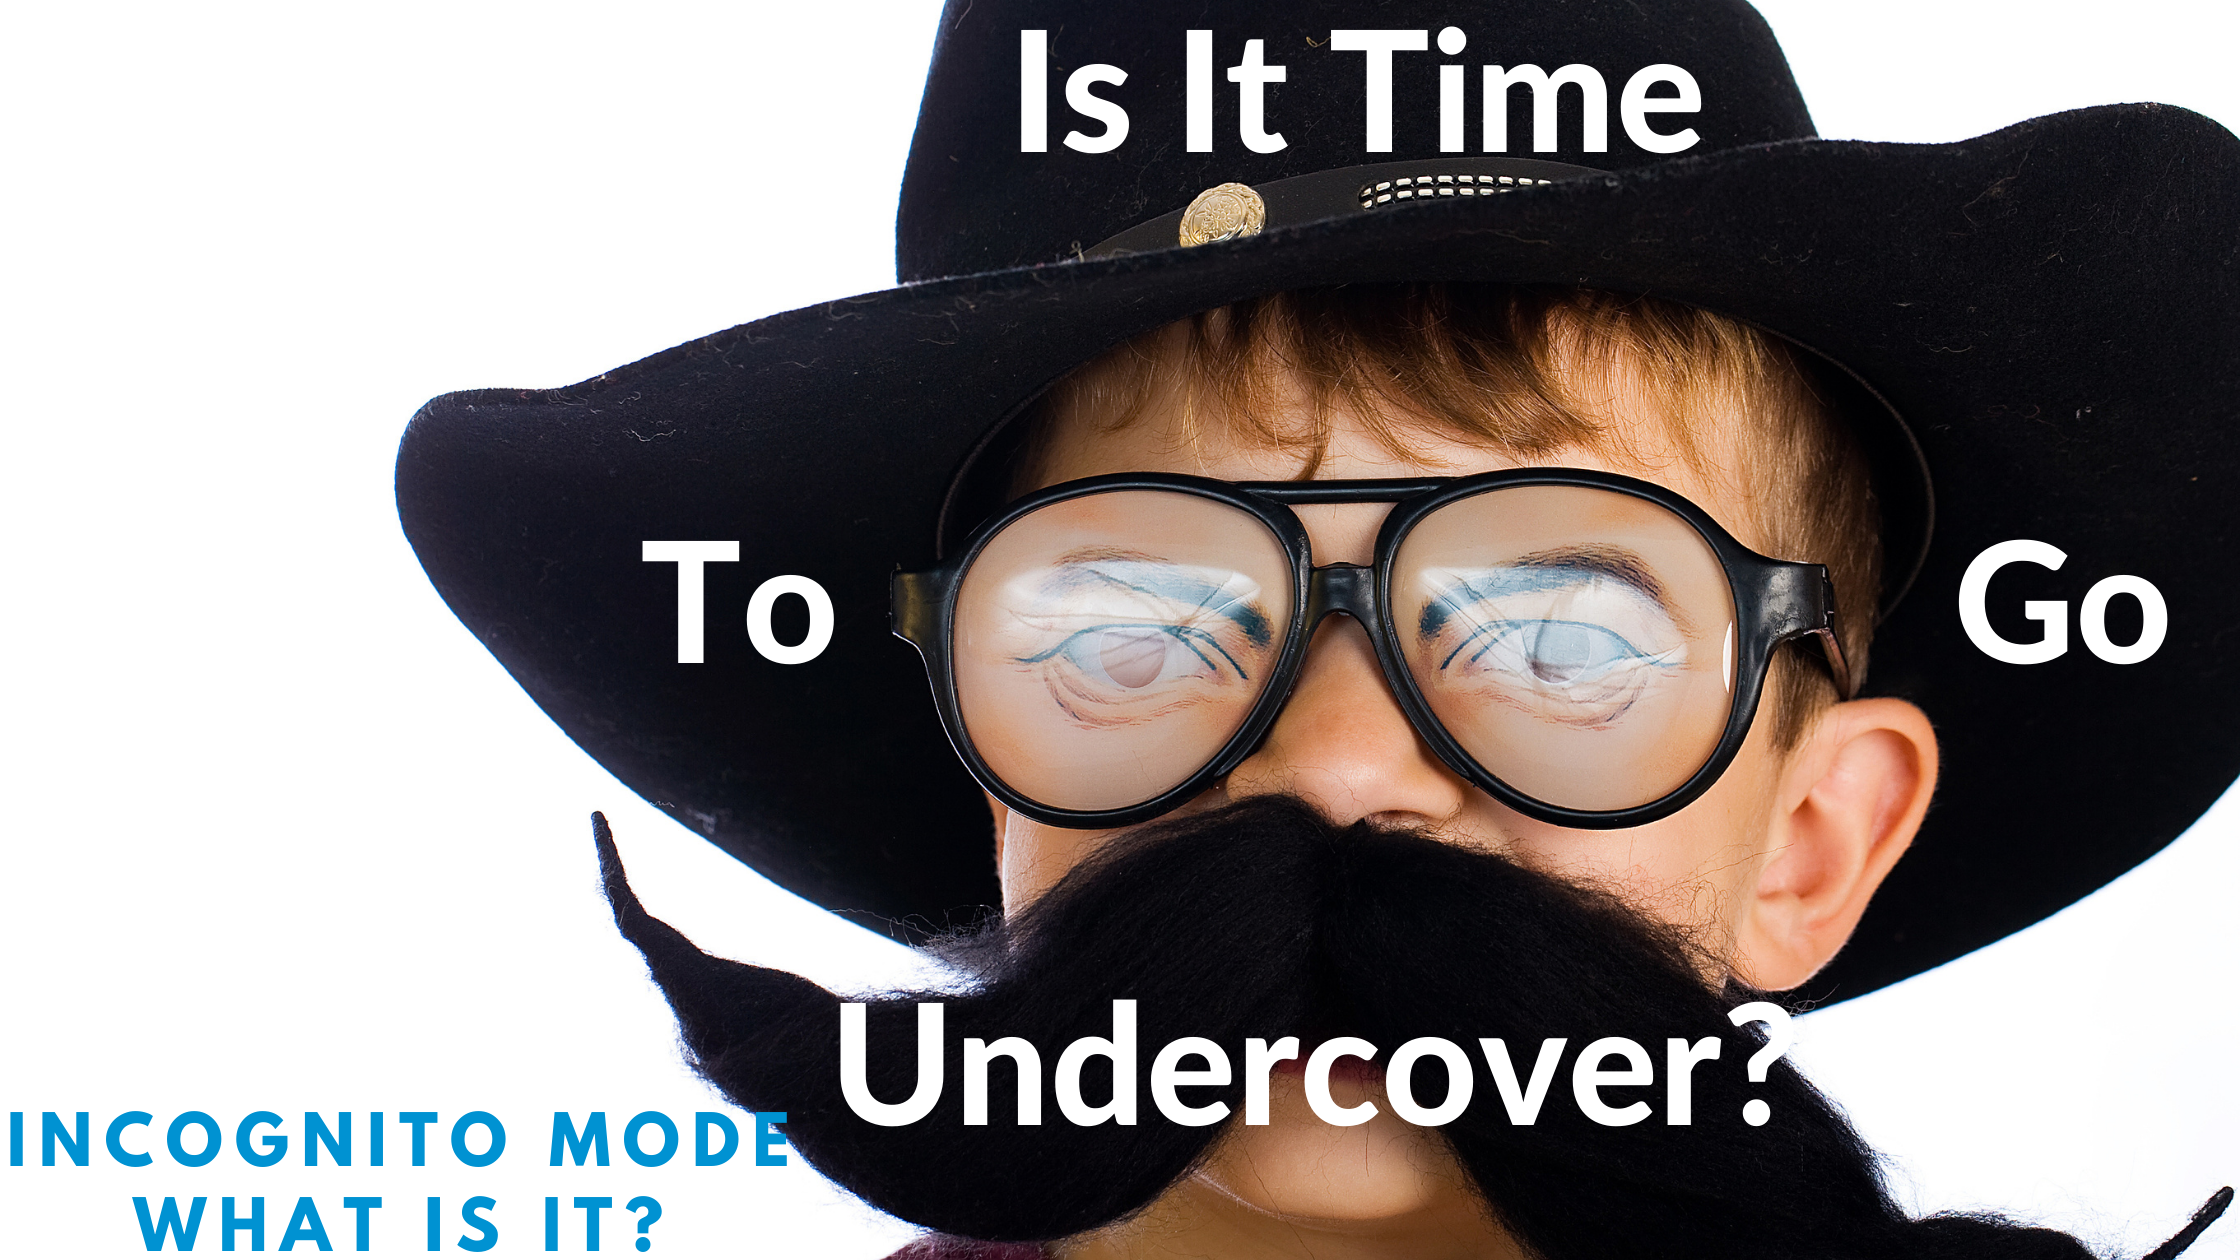 Is it time to go undercover?